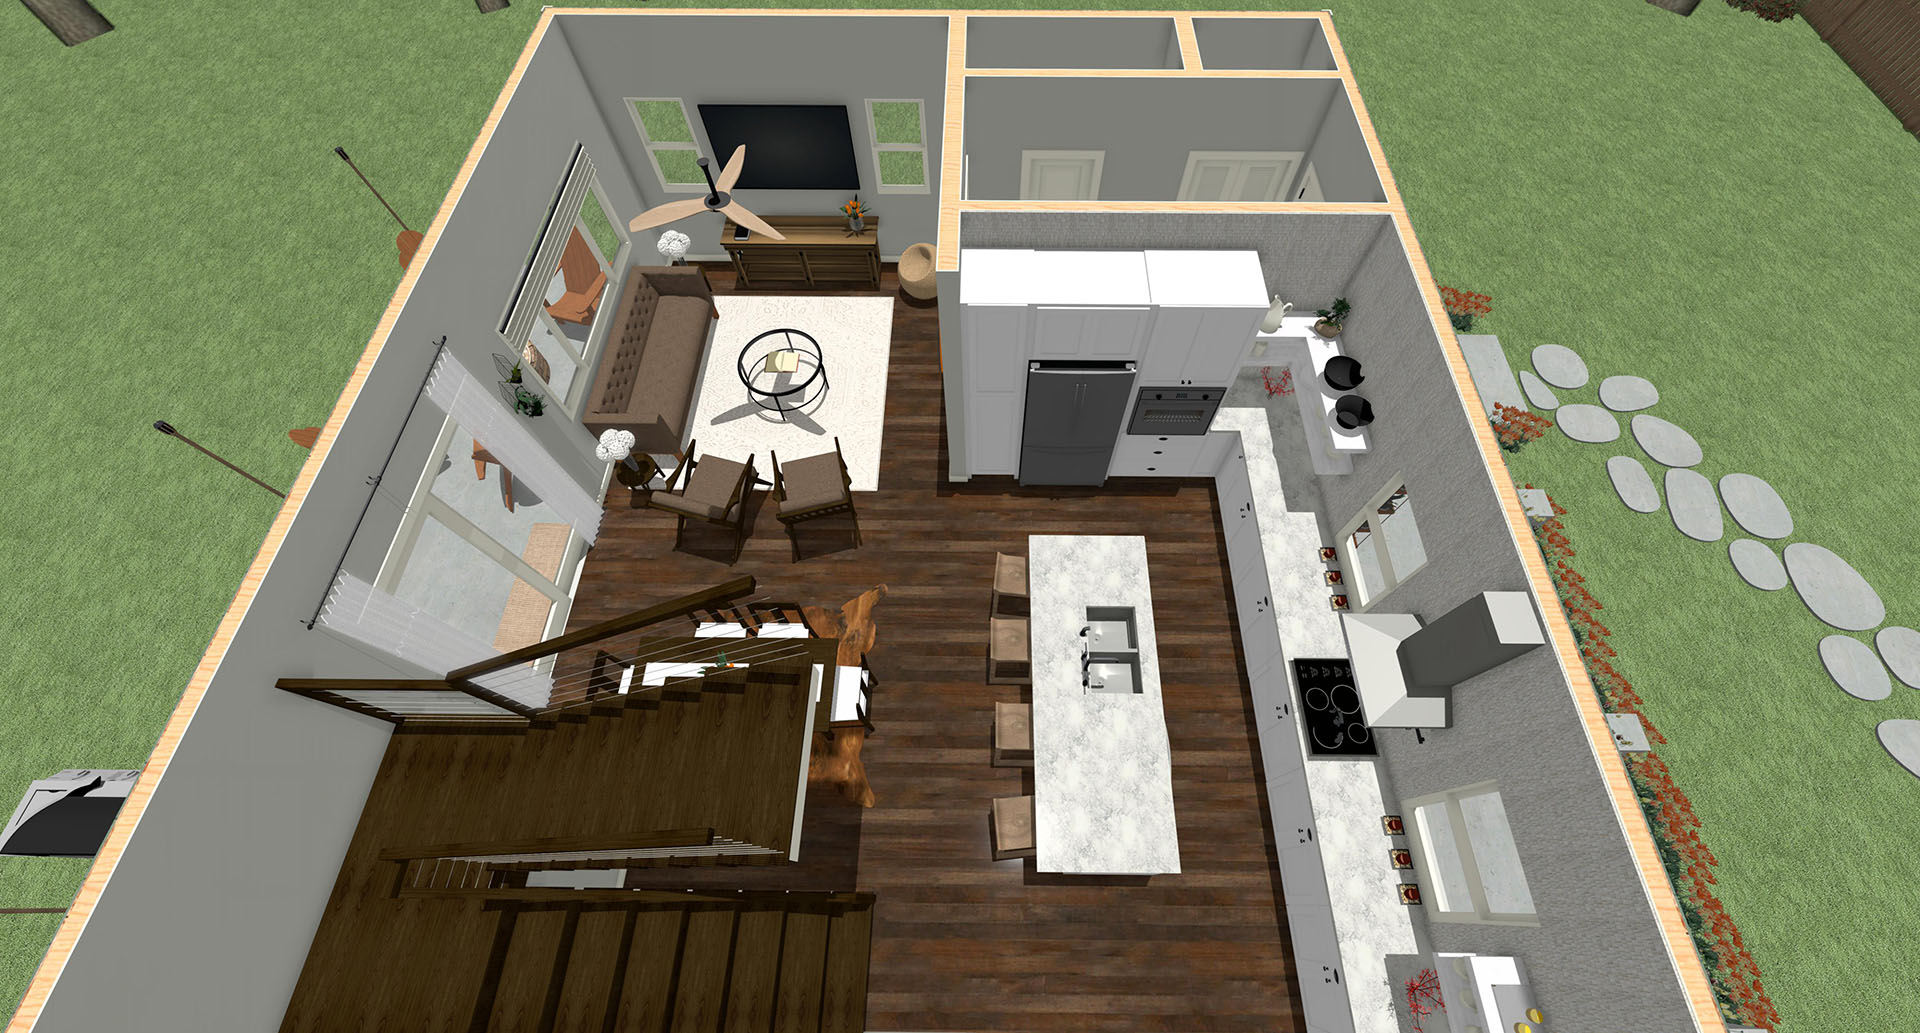 Aerial view of a house's living room and kitchen in the downstairs area